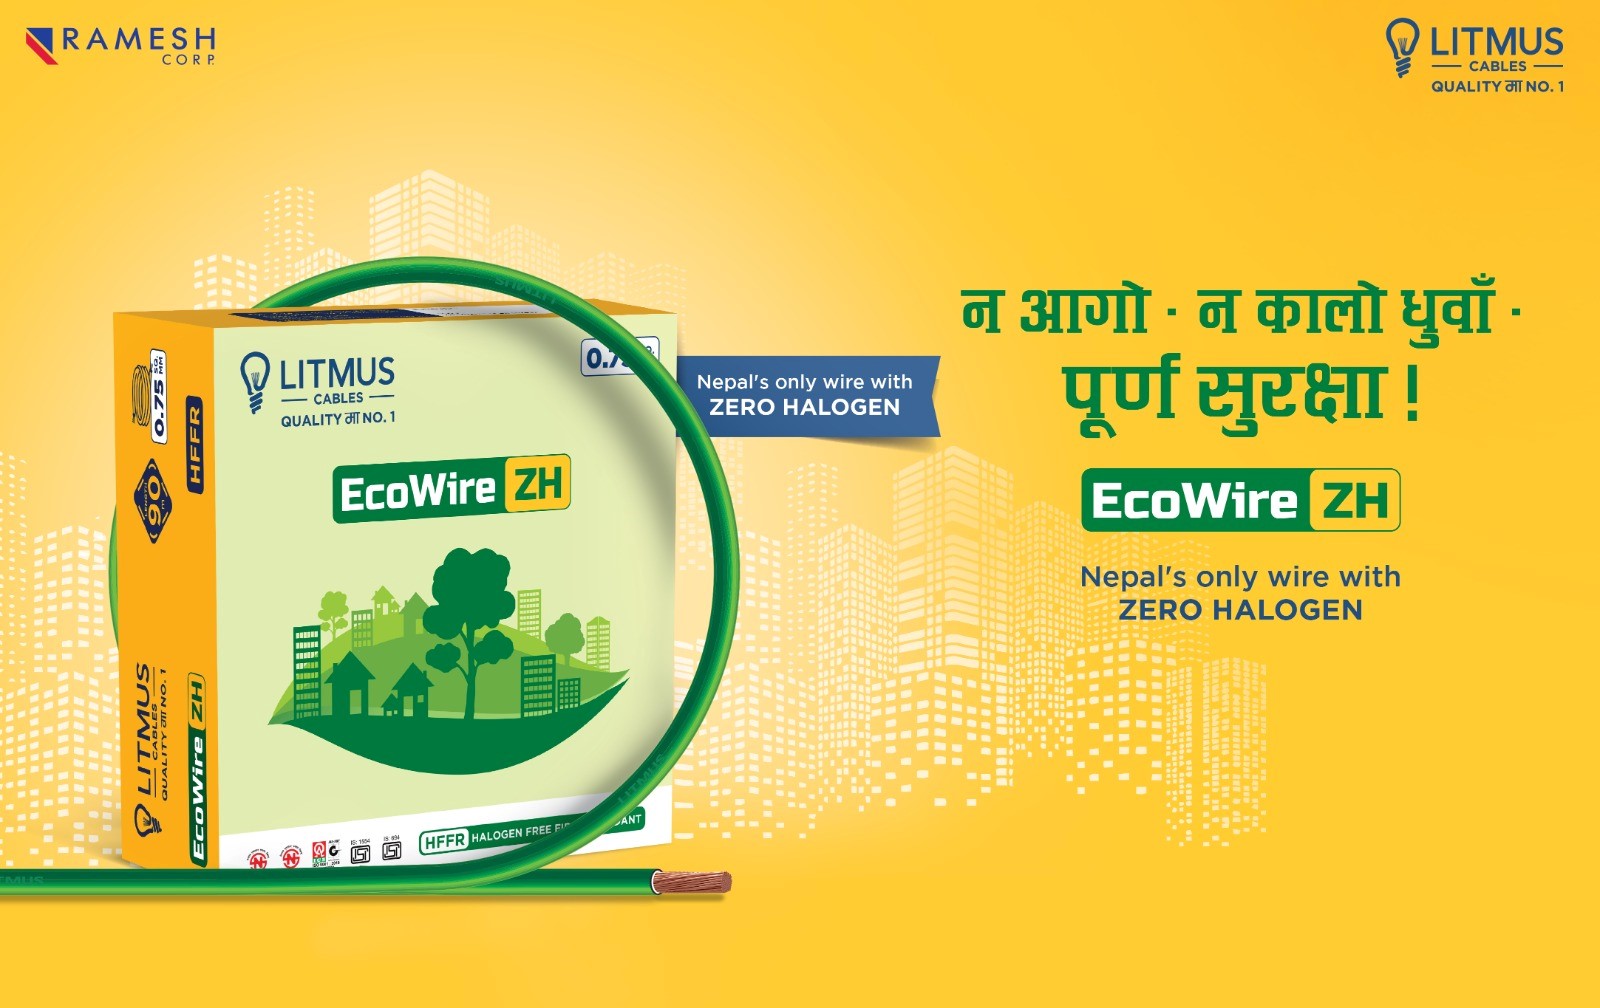 litmus-cables-introduces-ecowire-zh-nepals-first-zero-halogen-wire